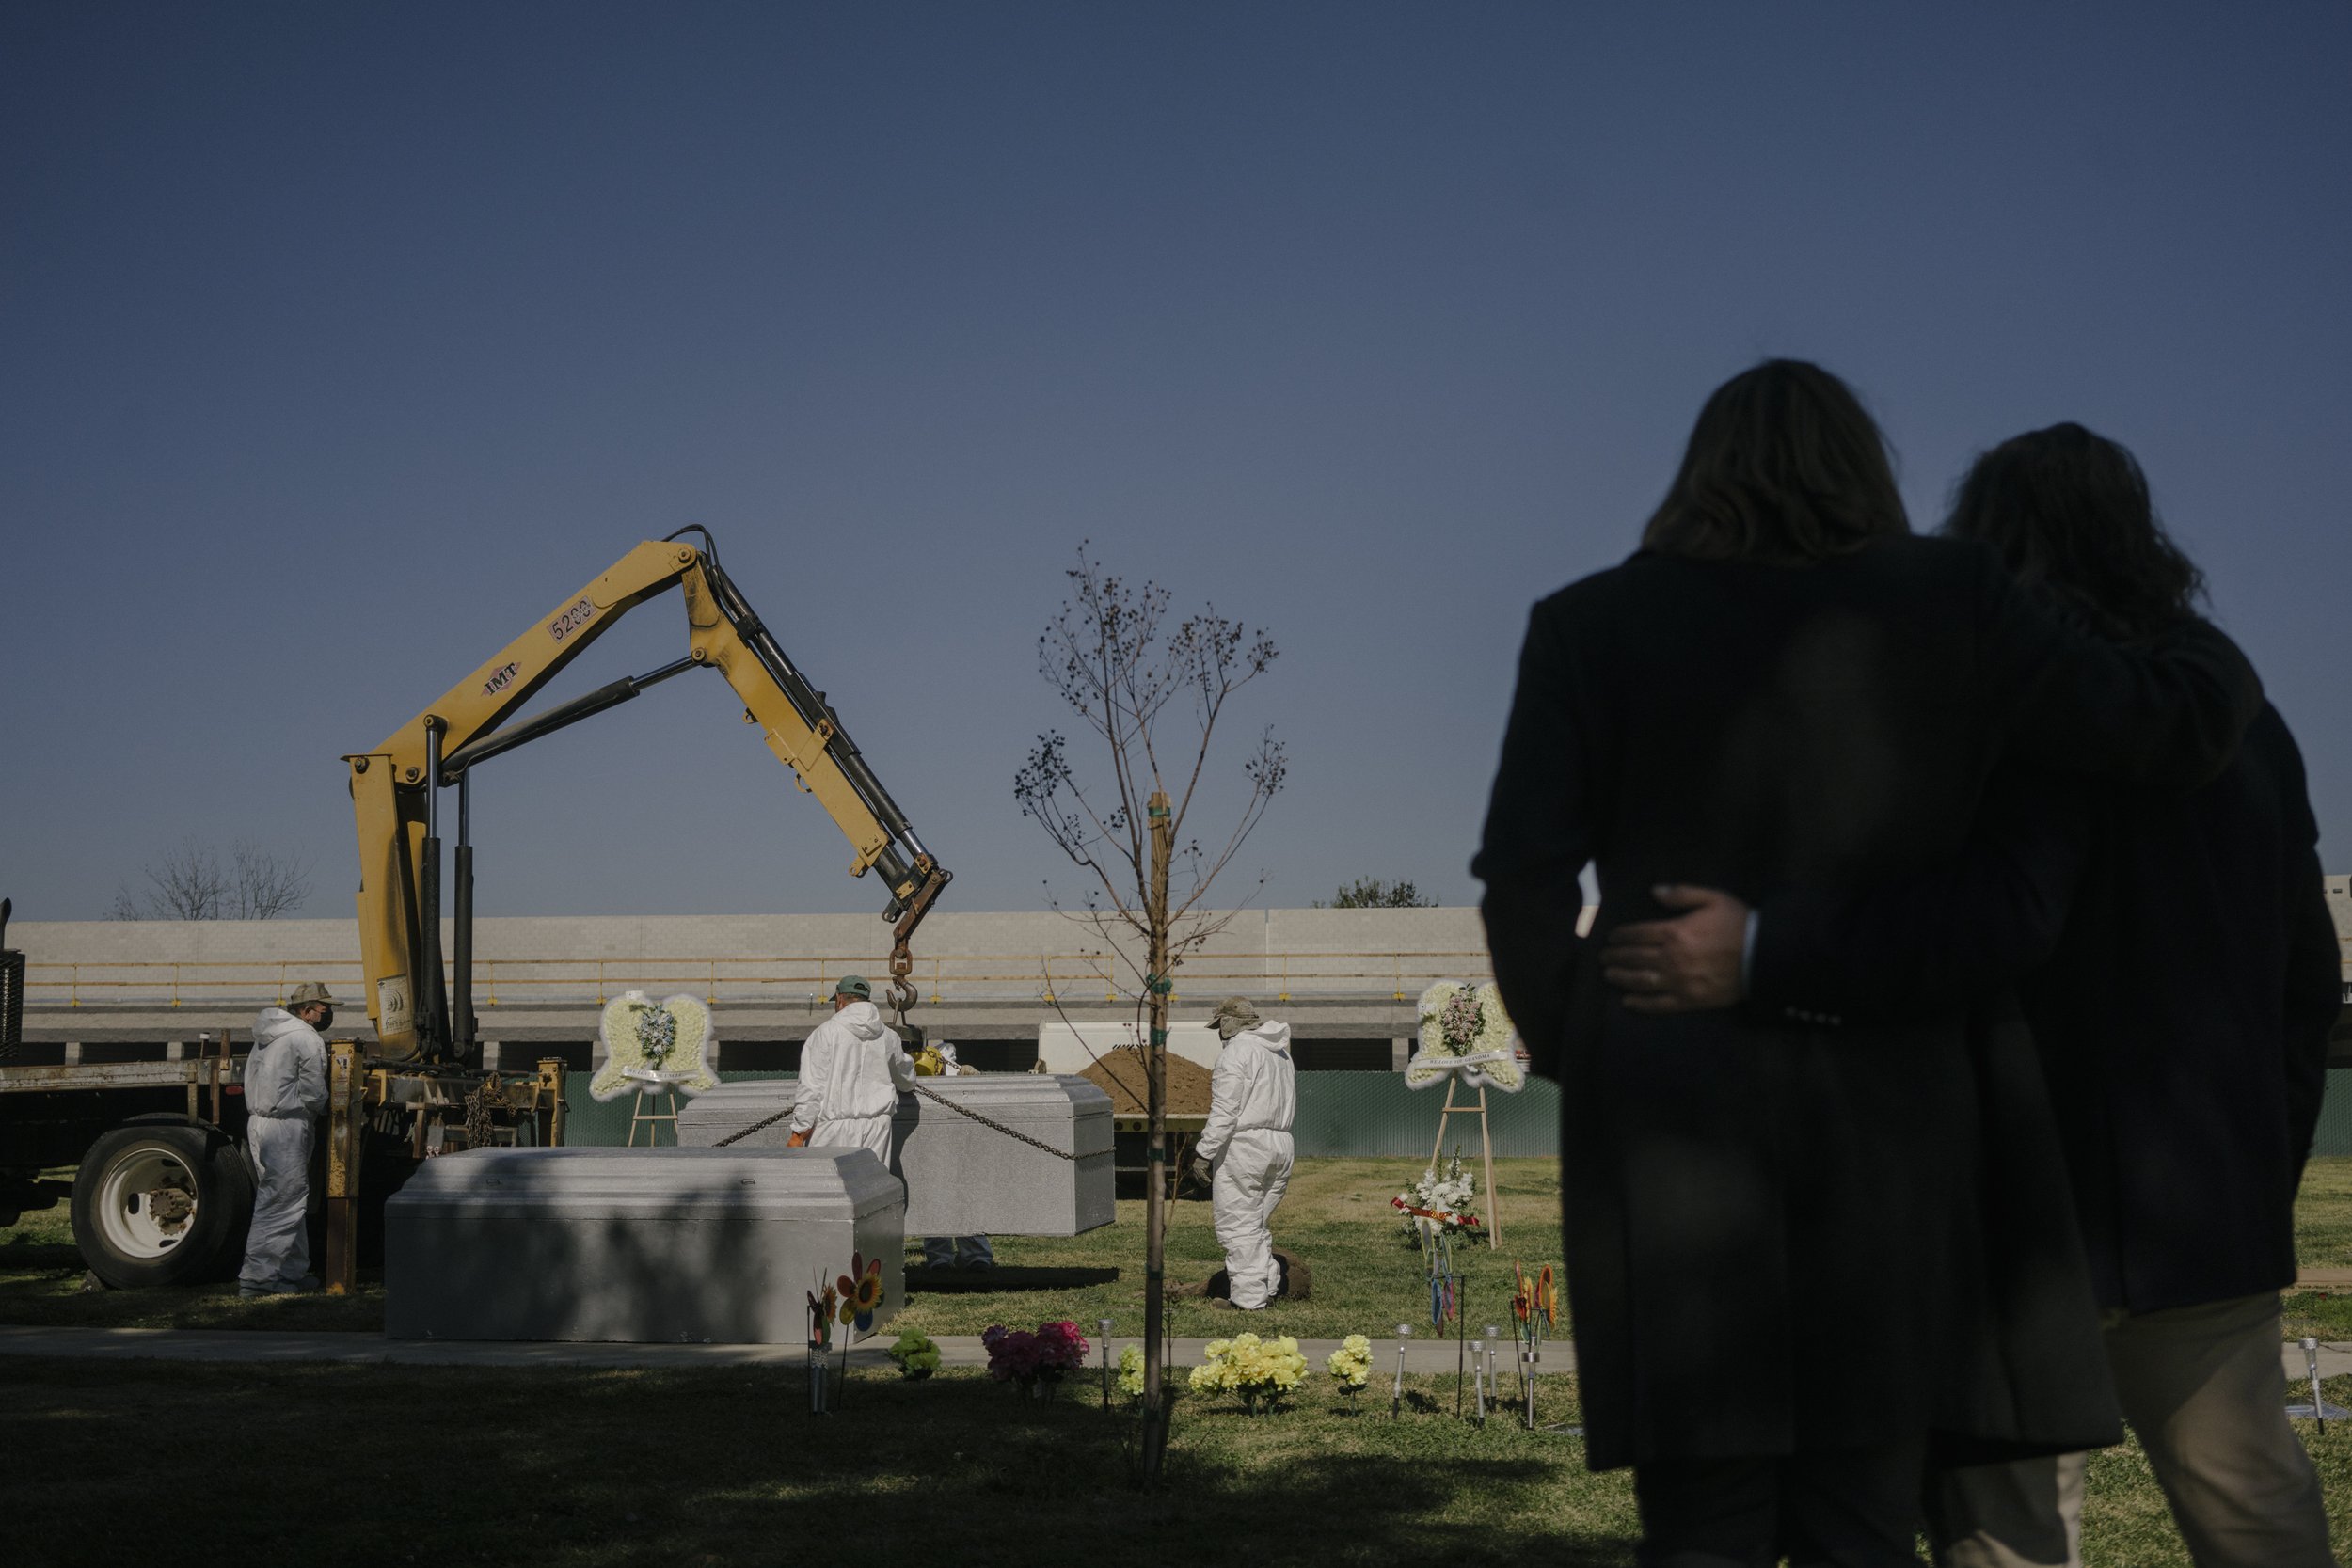  Family members of Maria Serrano and her son, Victor Serrano, embrace as they watch the burial of their coffins at Park Lawn Cemetery in Los Angeles, California. Both Maria and Victor passed away from COVID-19 related complications in January 2021.  